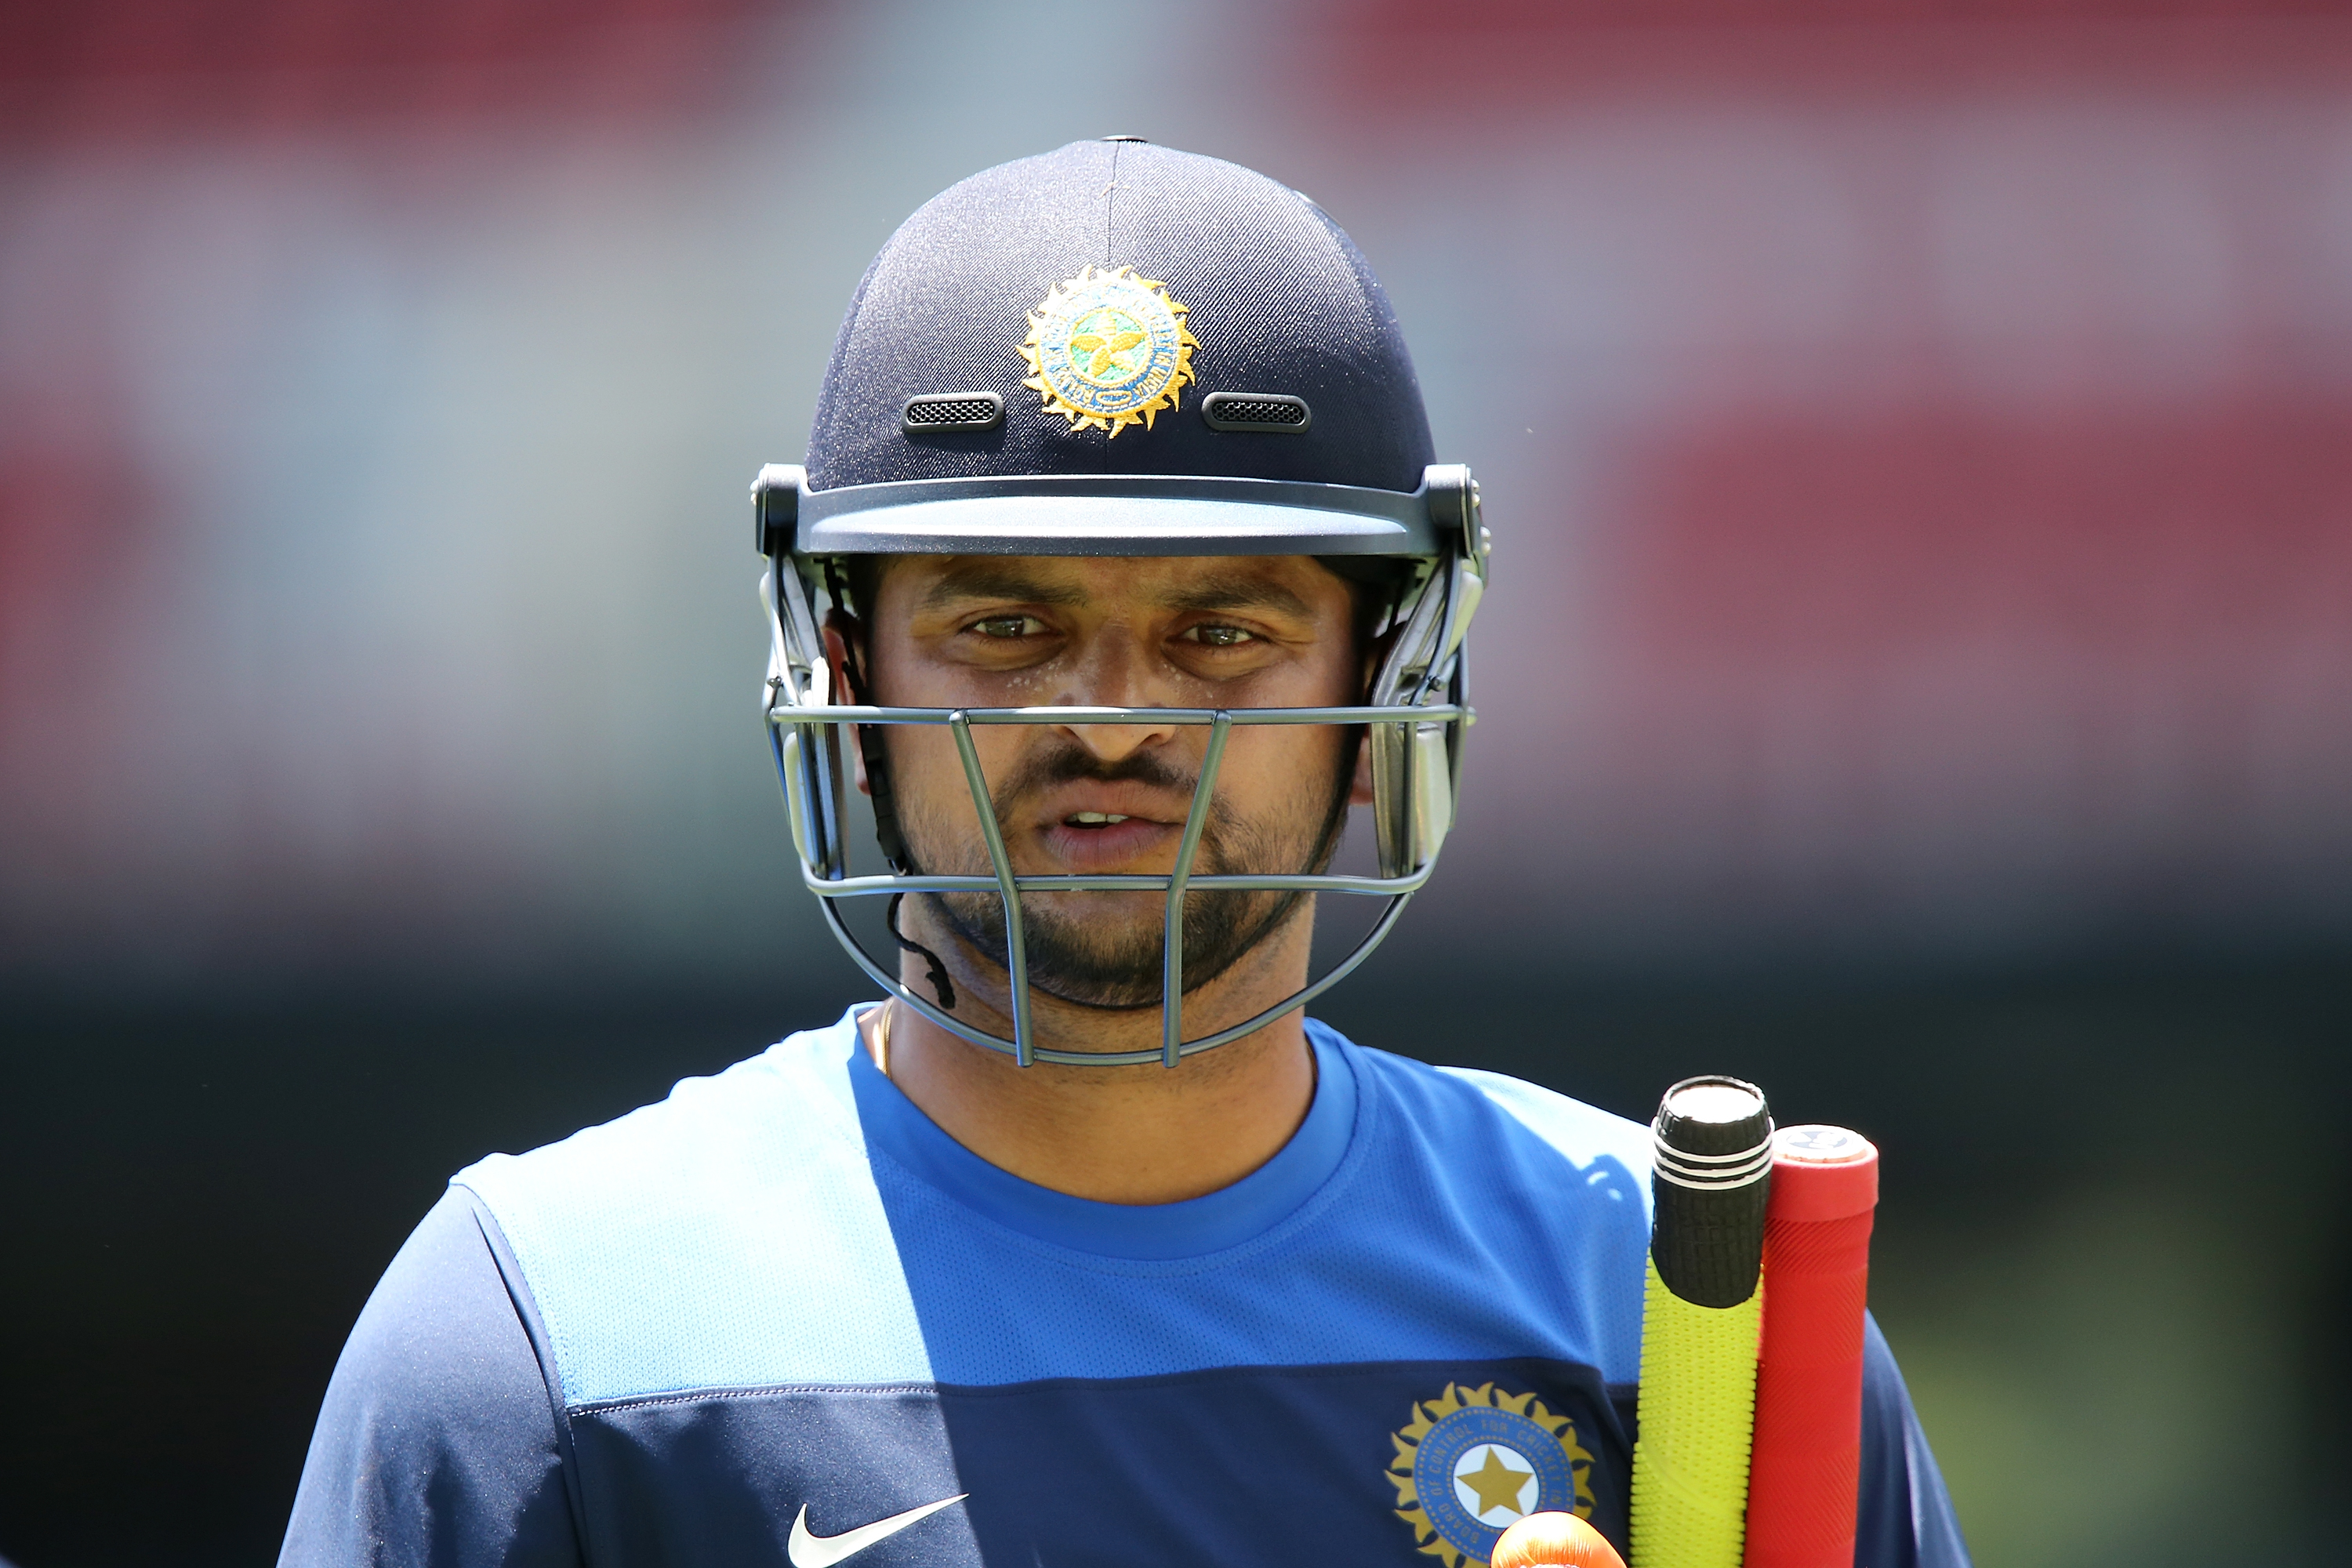 Is this the end of the road for Suresh Raina?